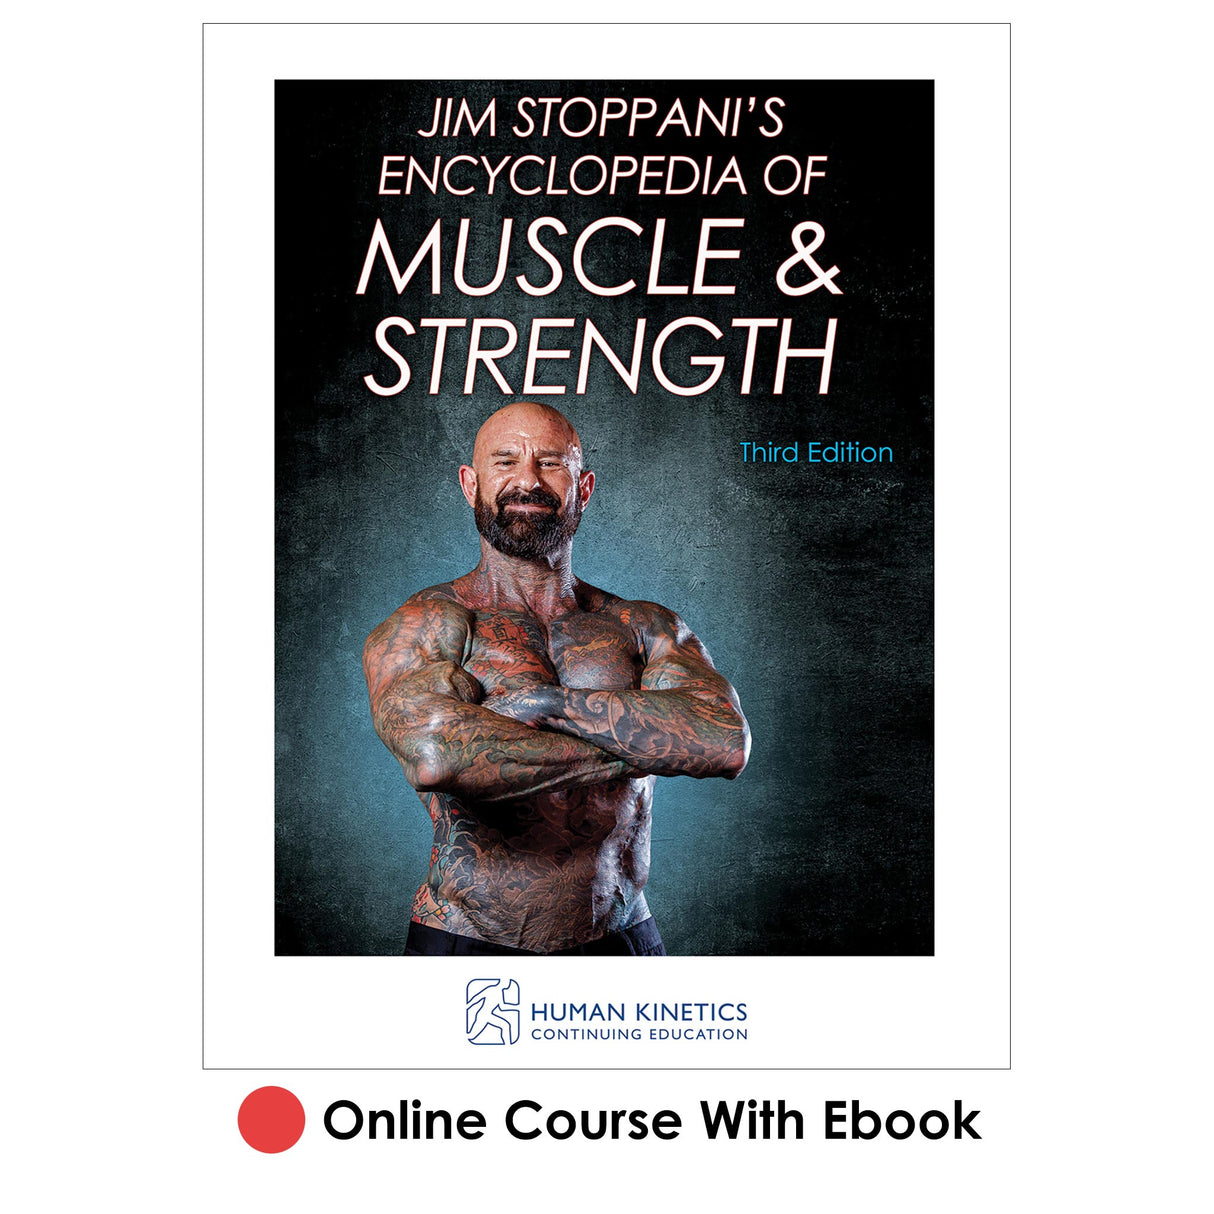 Jim Stoppani's Encyclopedia of Muscle & Strength 3rd Edition Online CE Course With Ebook